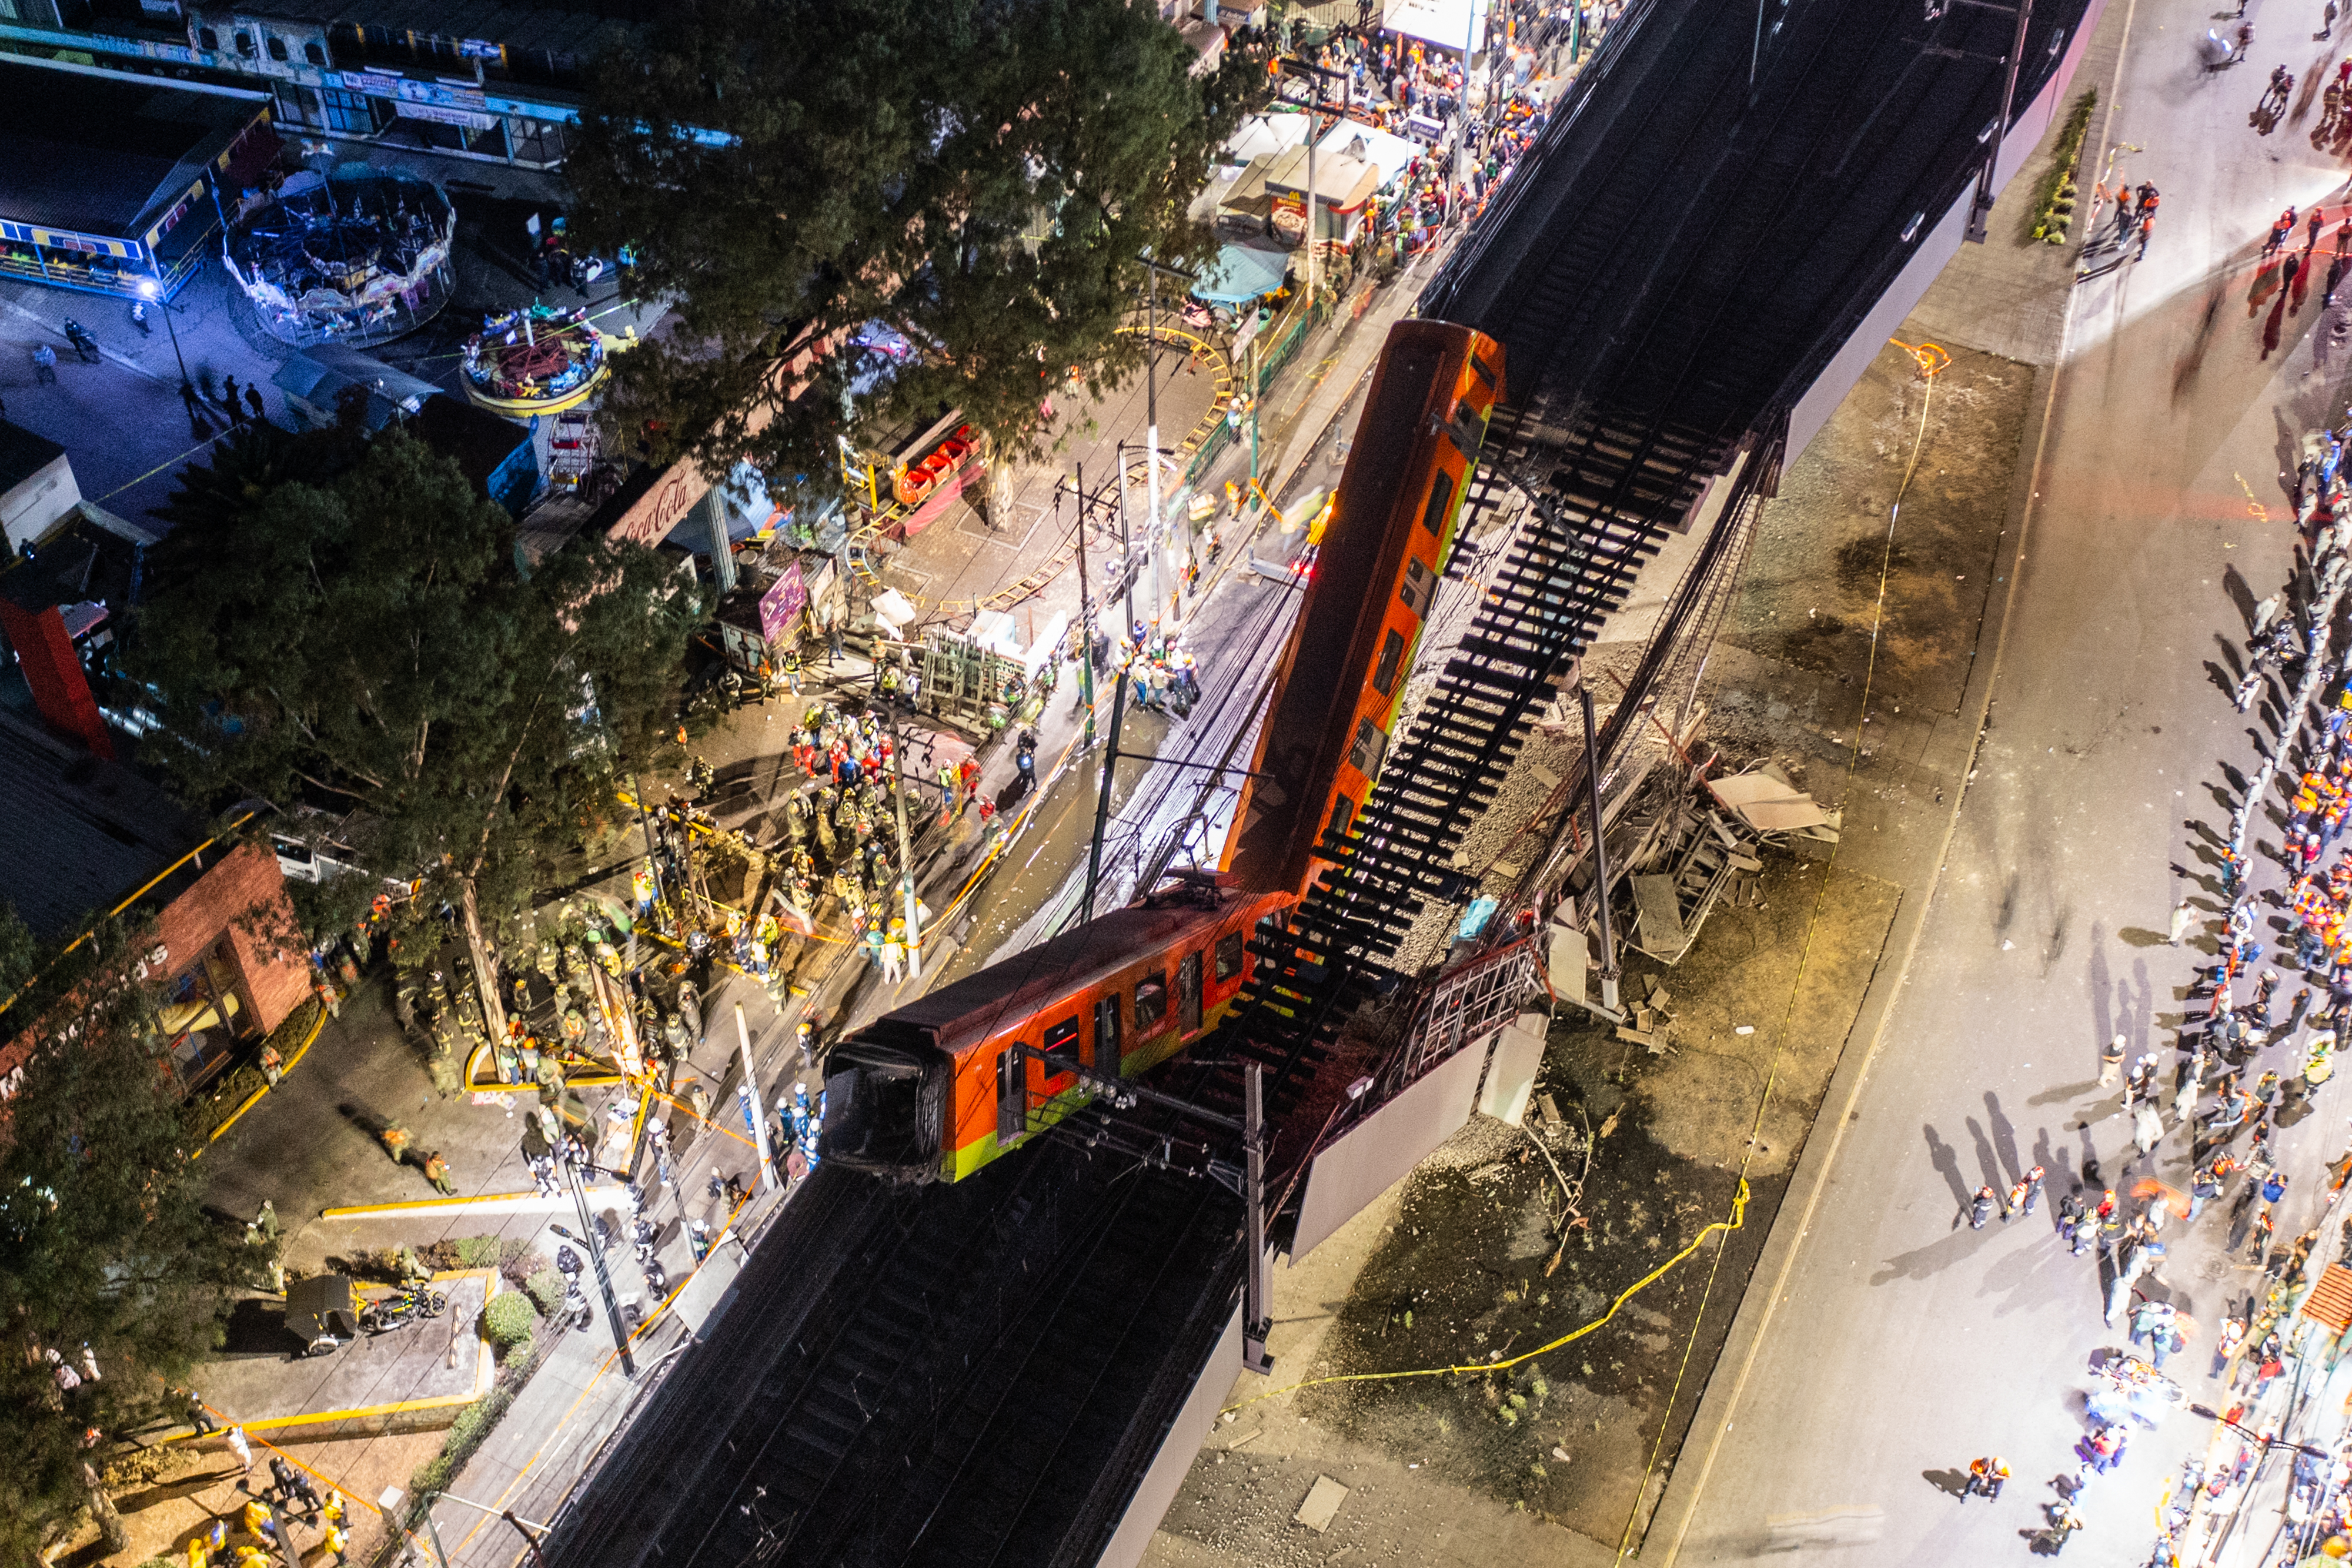 An aerial view of the scene after an elevated section of metro track in Mexico City, carrying train cars with passengers, collapsed onto a busy road in Mexico City, Mexico.